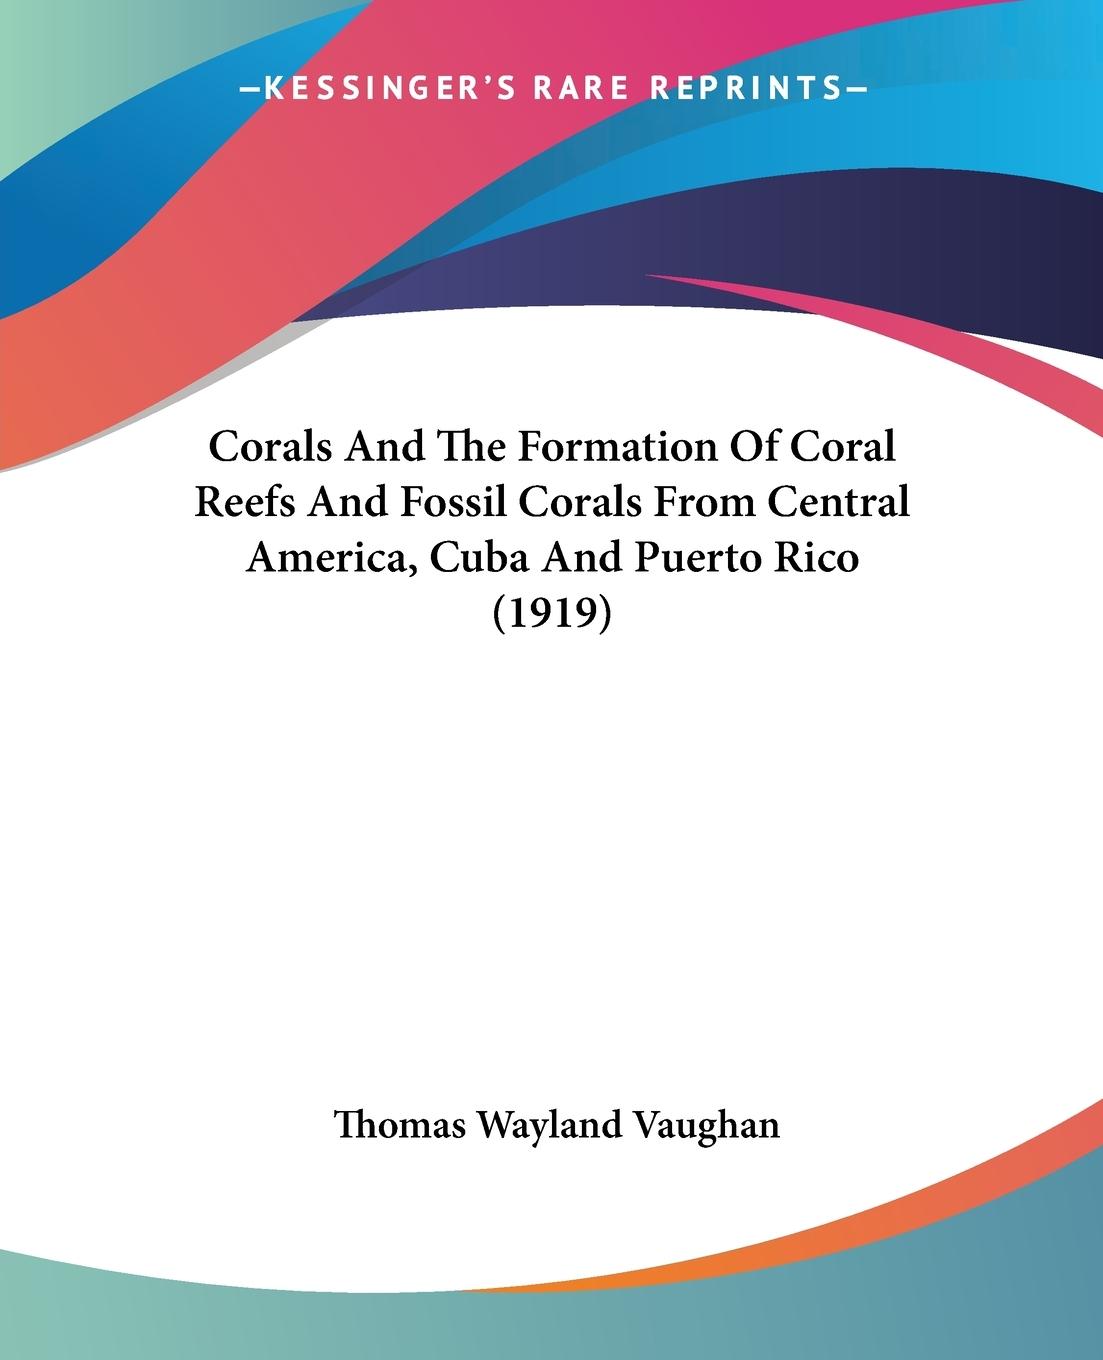 Corals And The Formation Of Coral Reefs And Fossil Corals From Central America, Cuba And Puerto Rico (1919) - Vaughan, Thomas Wayland